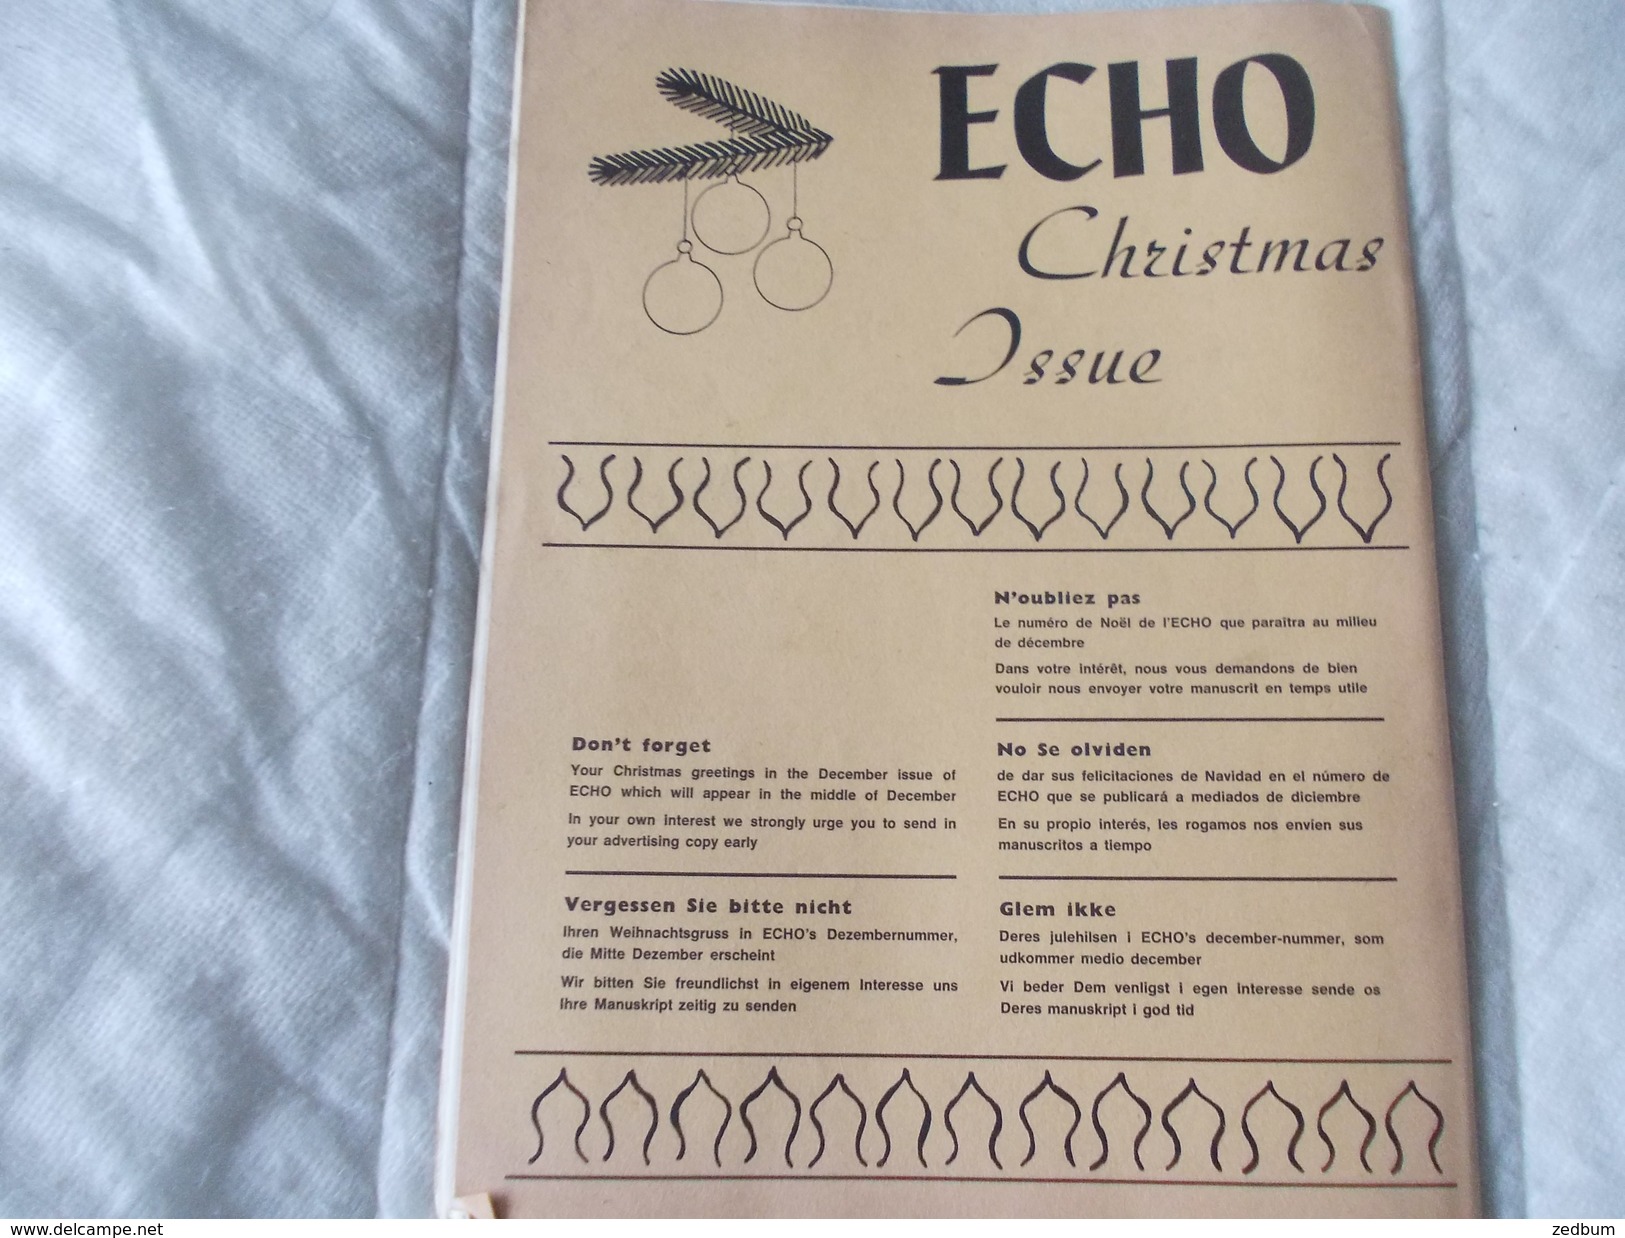 ECHO LTD Professional Circus And Variety Journal Independent International N° 321 November 1968 - Entretenimiento